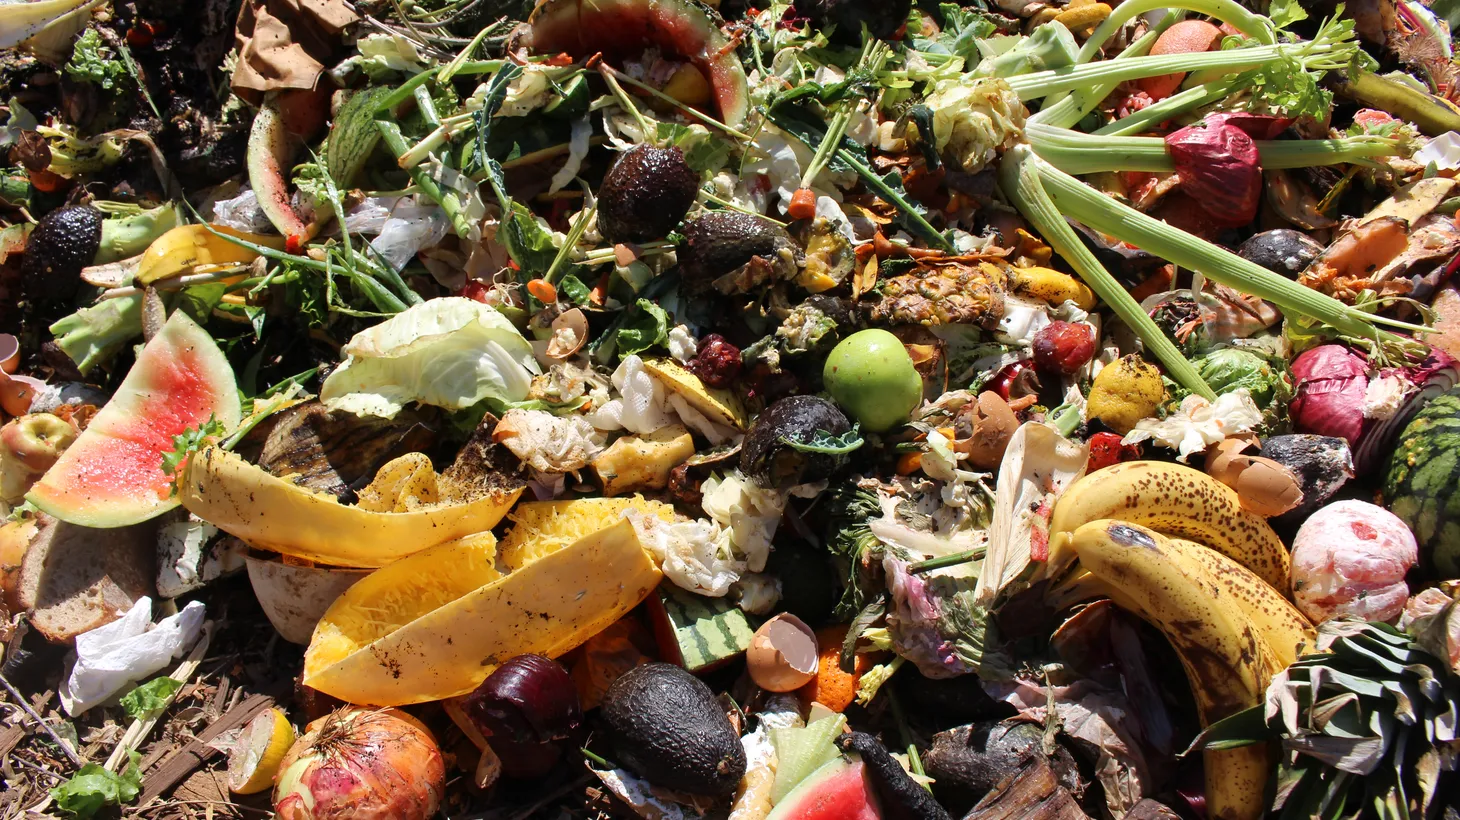 Most food scraps in California are still getting buried in landfills and contributing to climate change. A state law aims to change that.